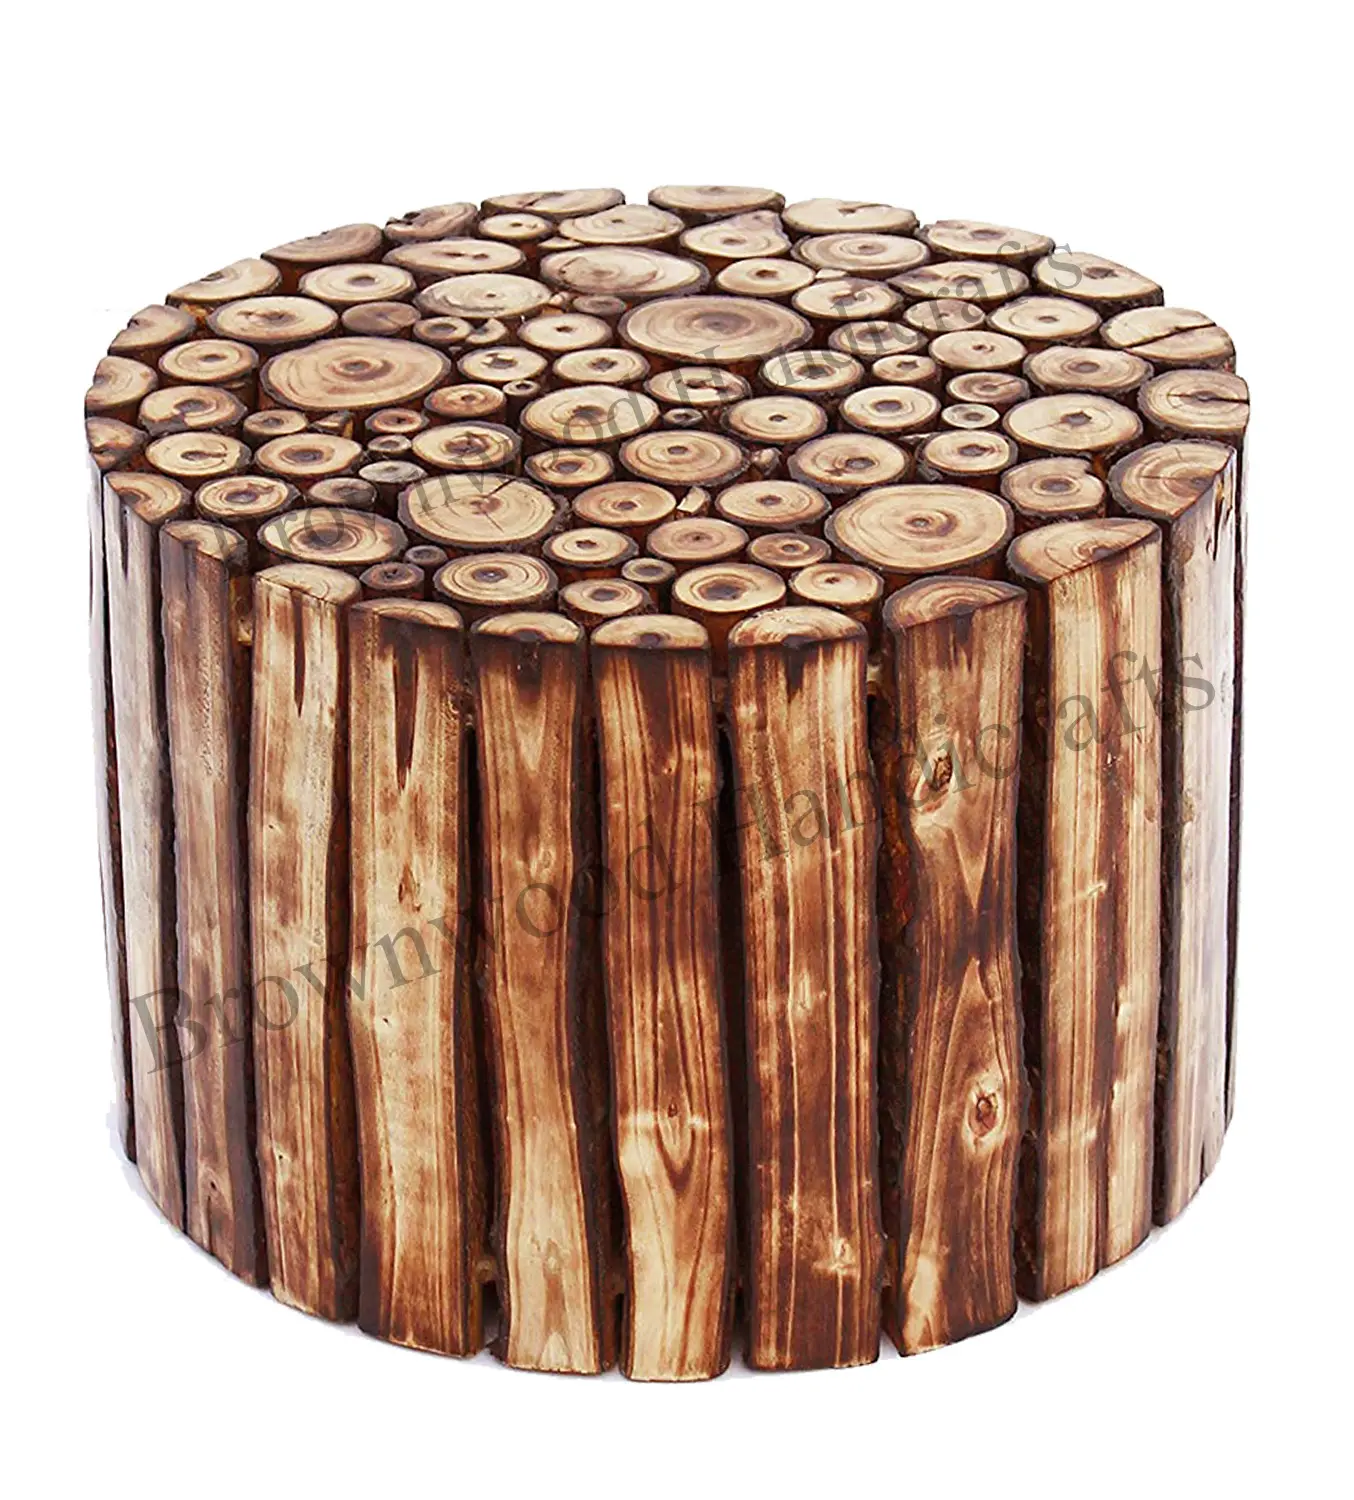 Export Quality Antique Design Widely Used Durable 12x12x12 Inch Round Wooden Stool Handmade Attractive Design Stool for Decor